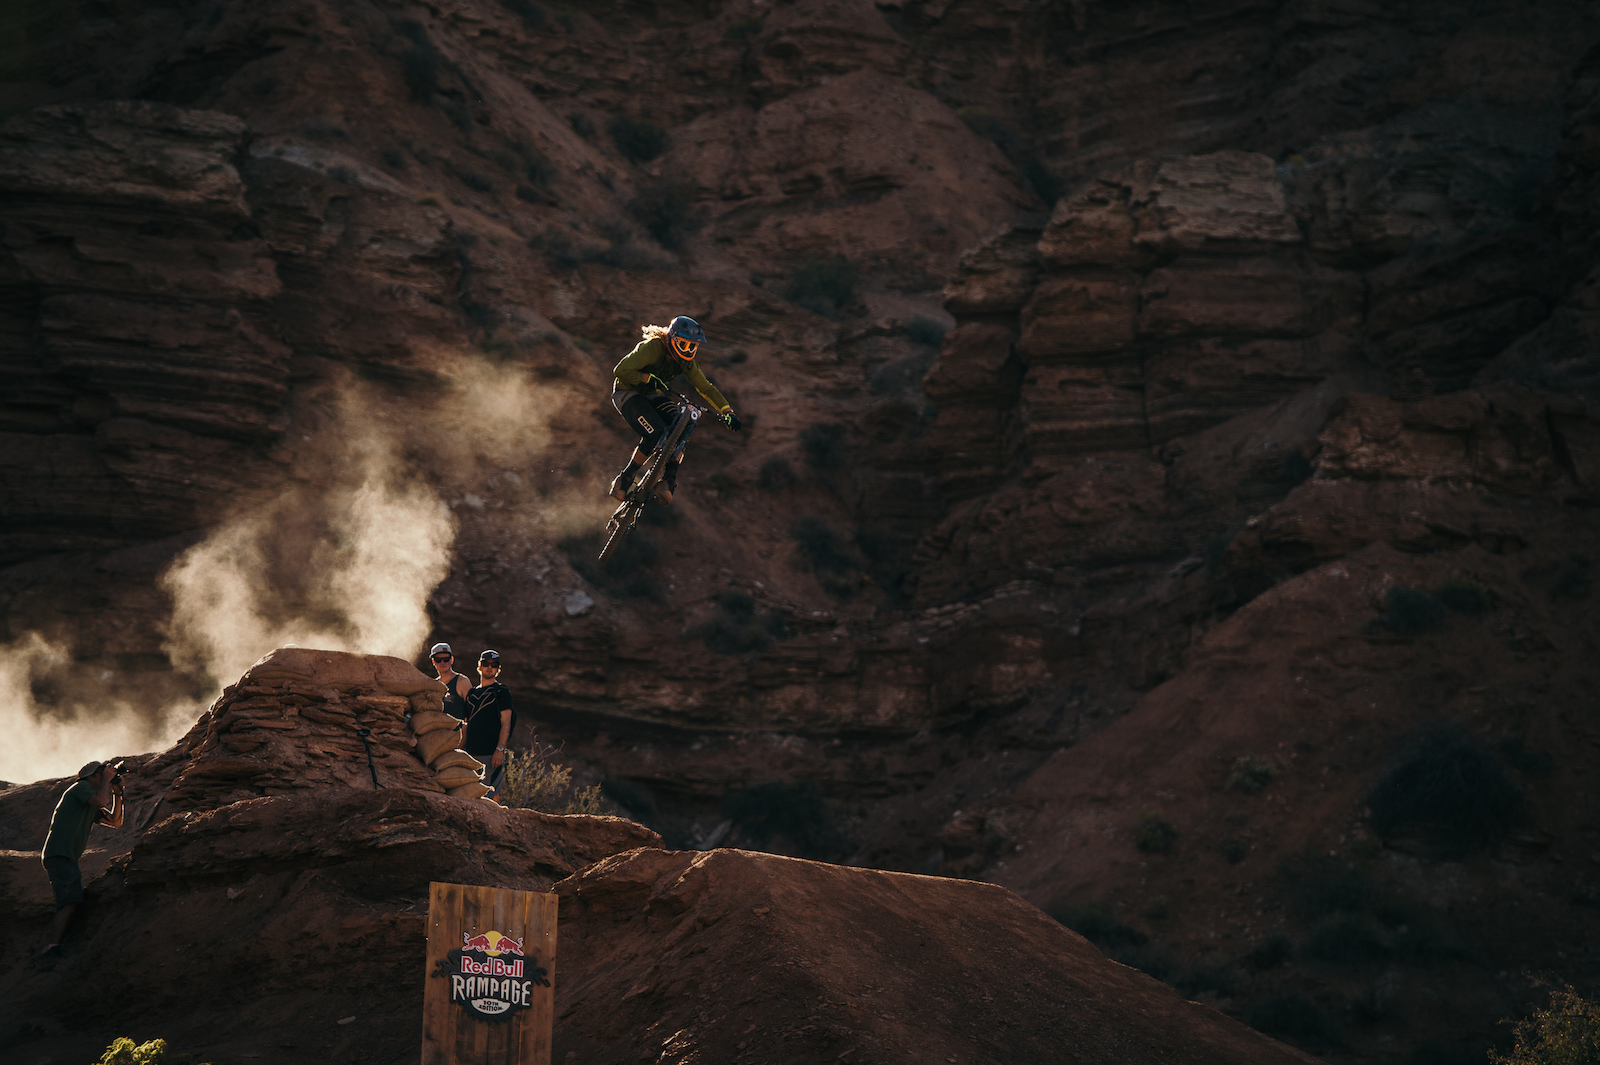 Kelly McGarry getting the last of the afternoon light during the 2015 Red Bull Rampage in Virgin UT.